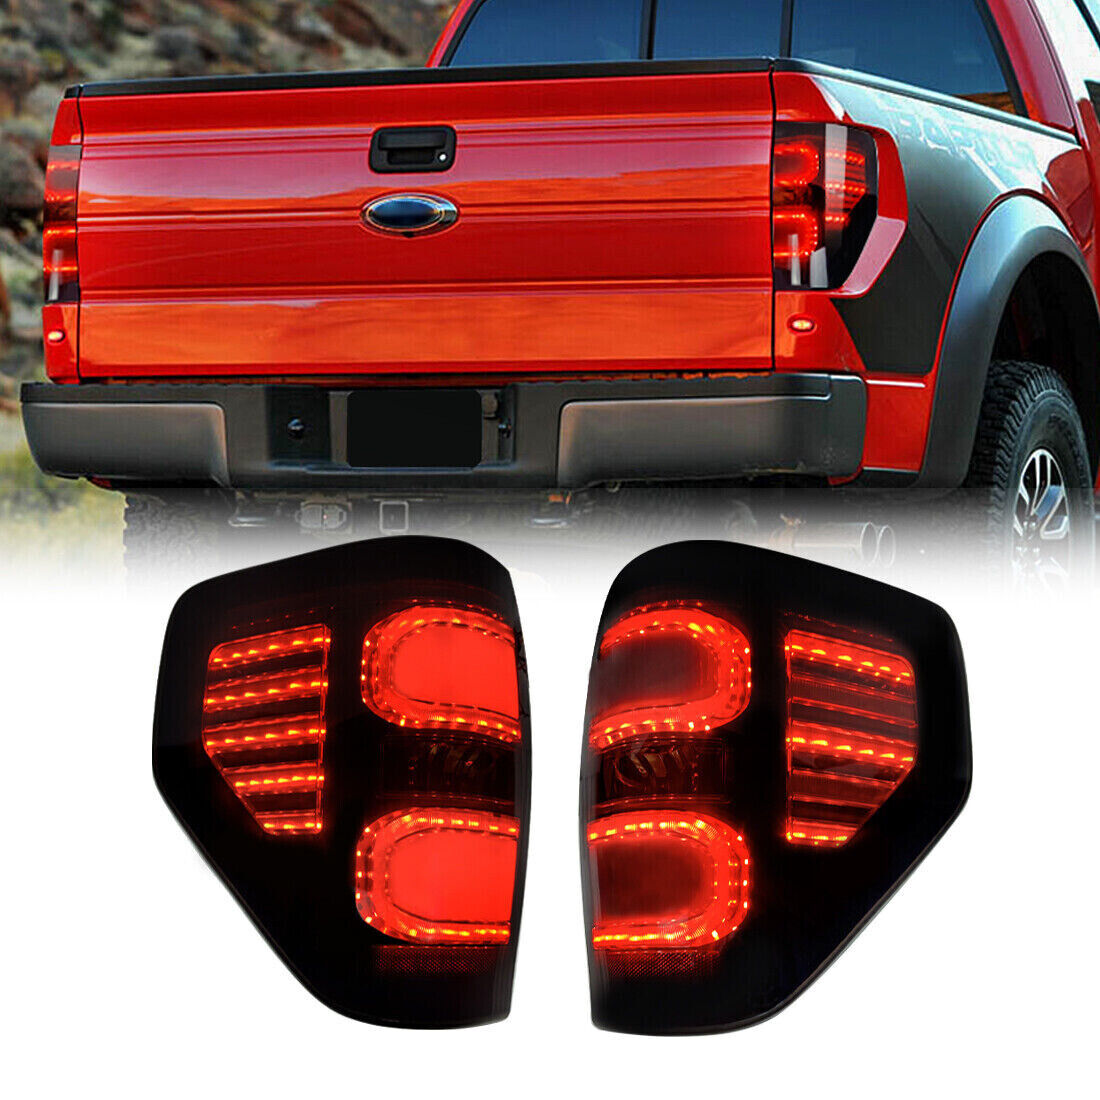 Smoked LED Tail Lights W/Bulb Rear Left+Right Lamp For 2009-2014 Ford F150 F-150